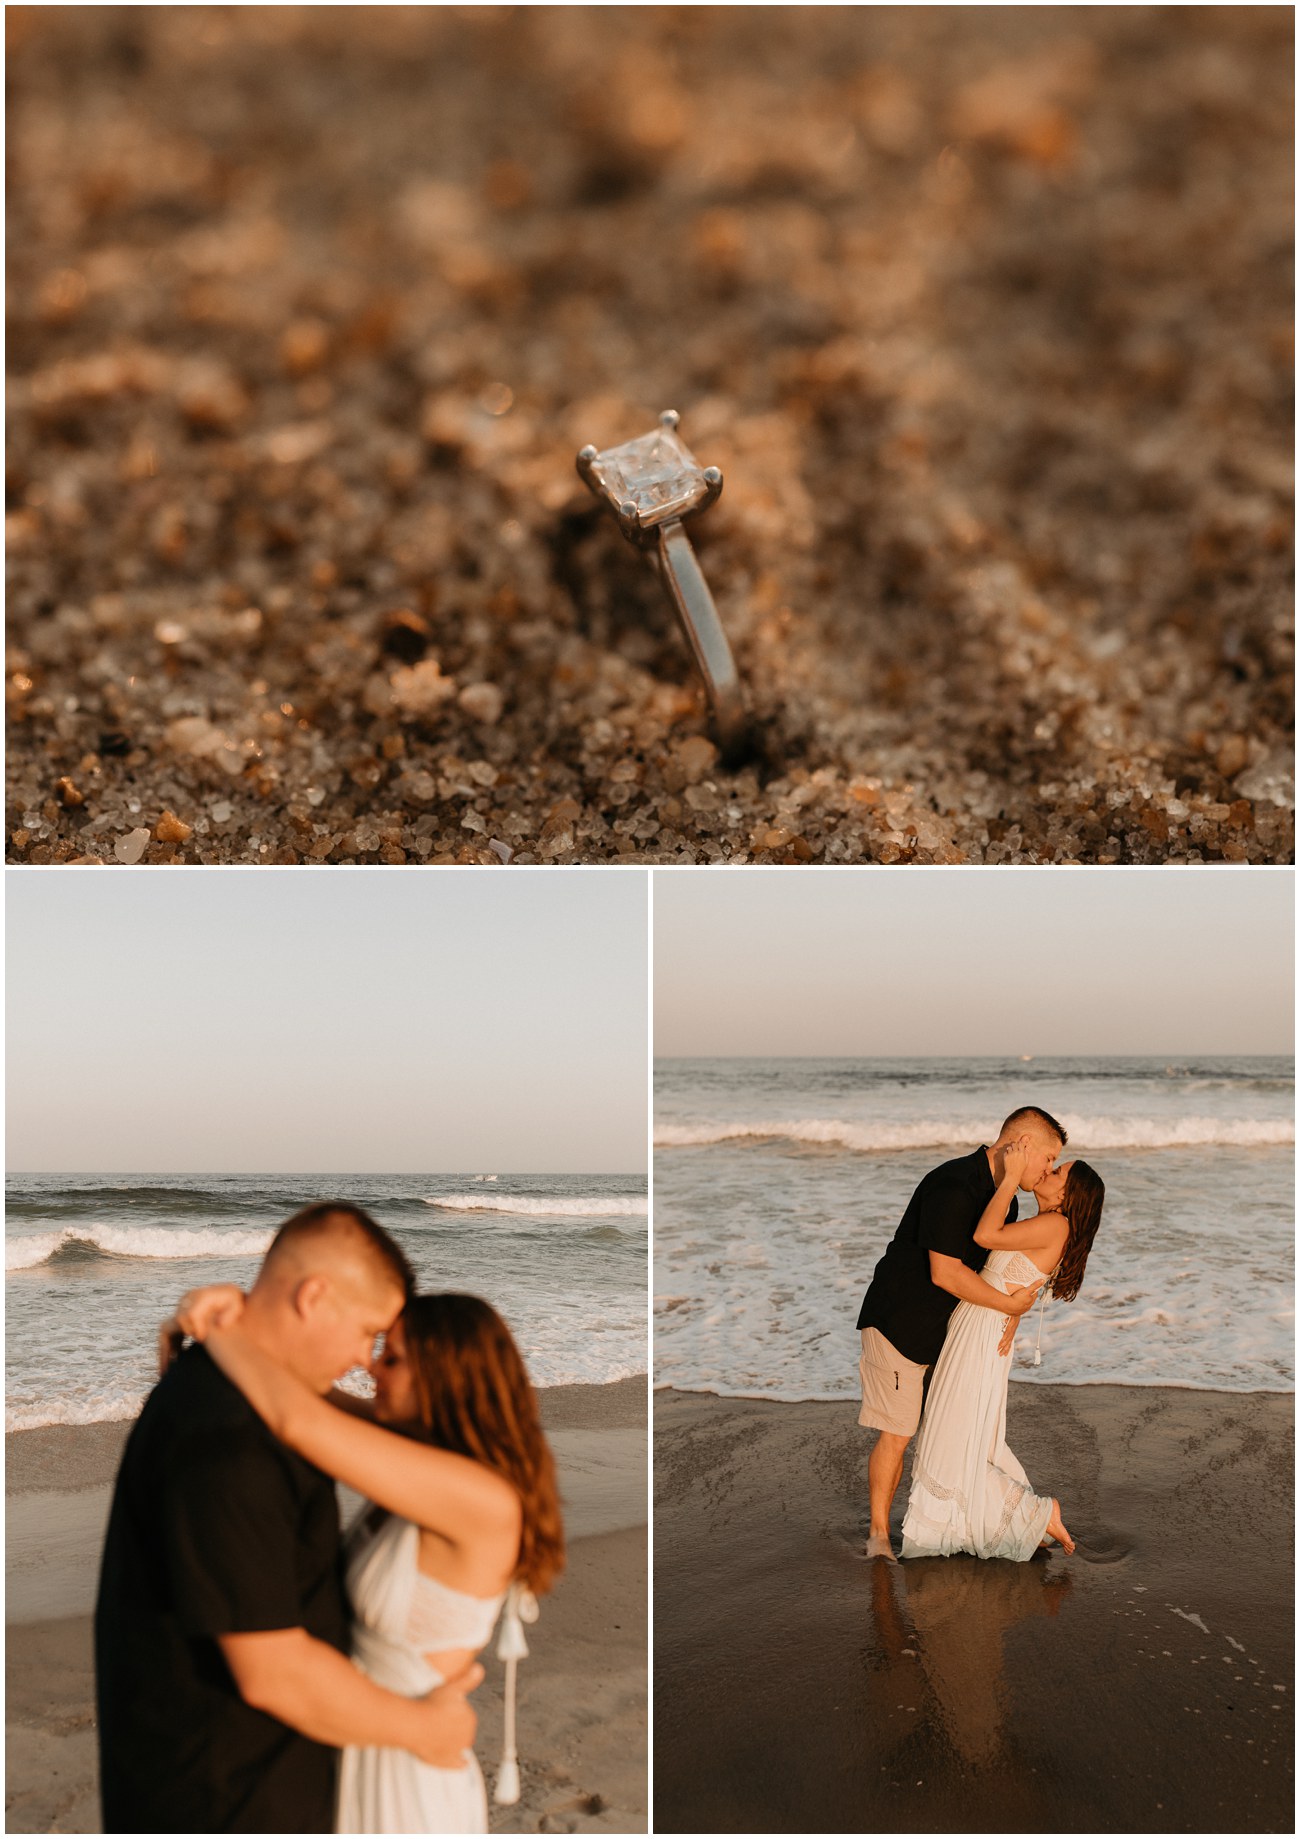 Collage of engagement ring and couple for Sea Girt Engagement session